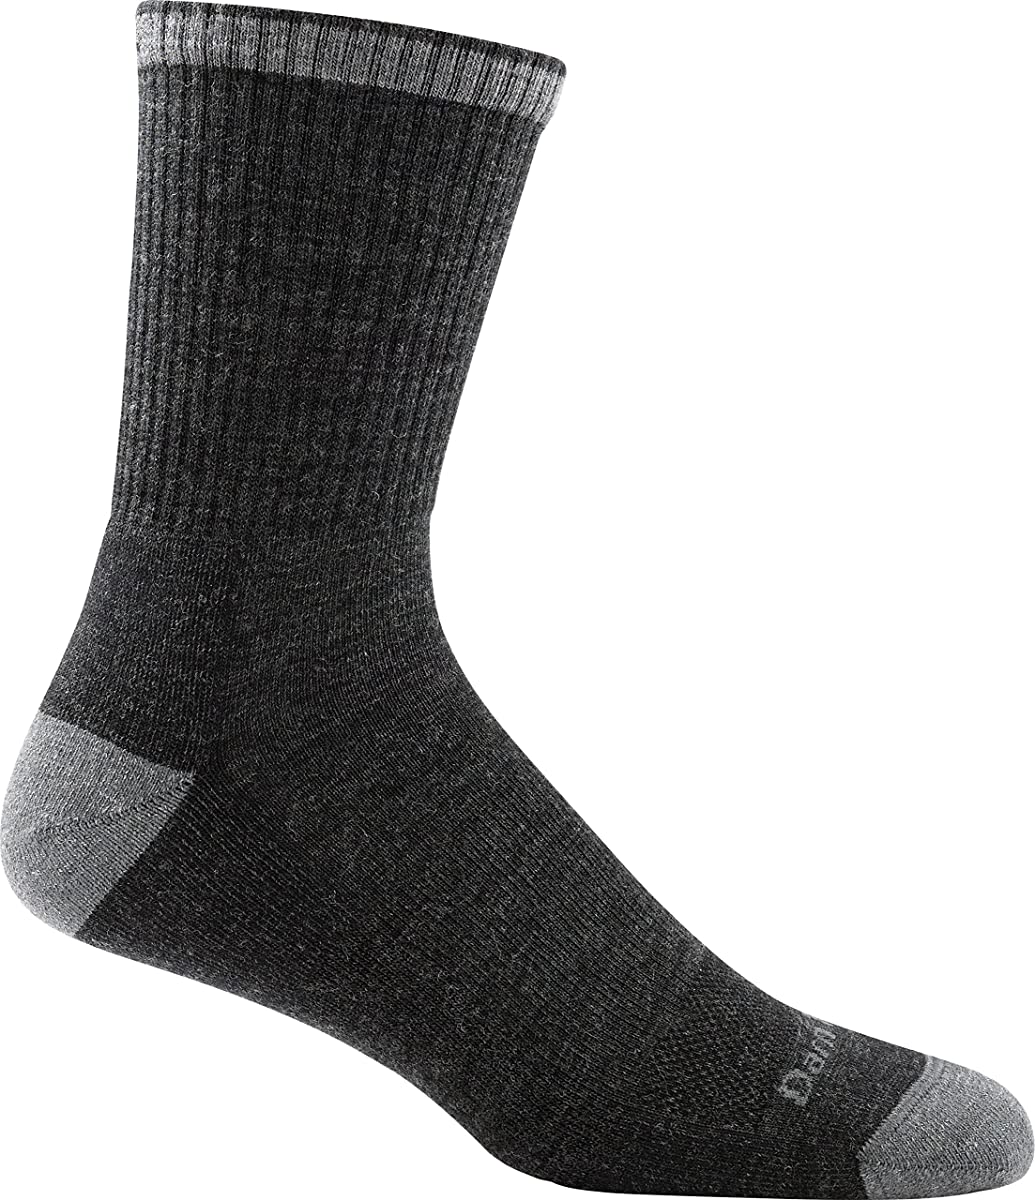 Men's Darn Tough Fred Tuttle Micro Crew Cushion Sock in Gravel from the side view